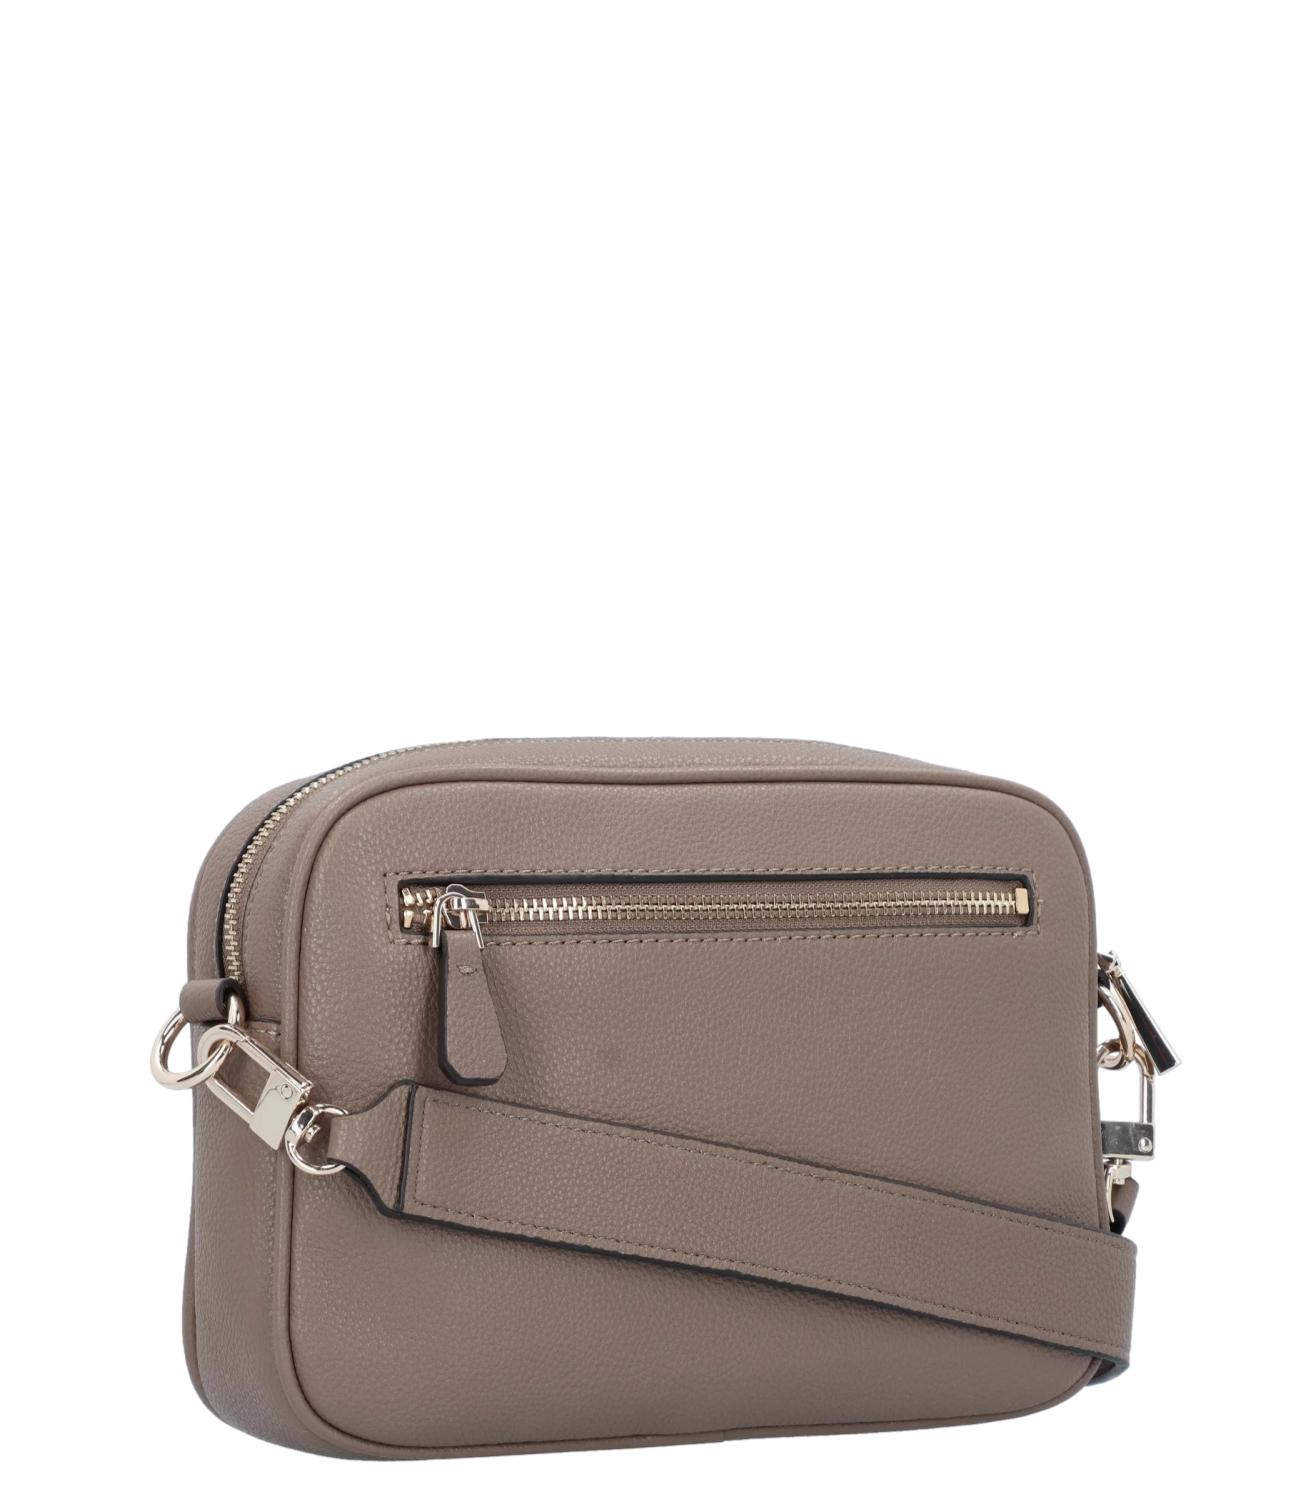 GUESS Meridian camera bag in greystone color for women